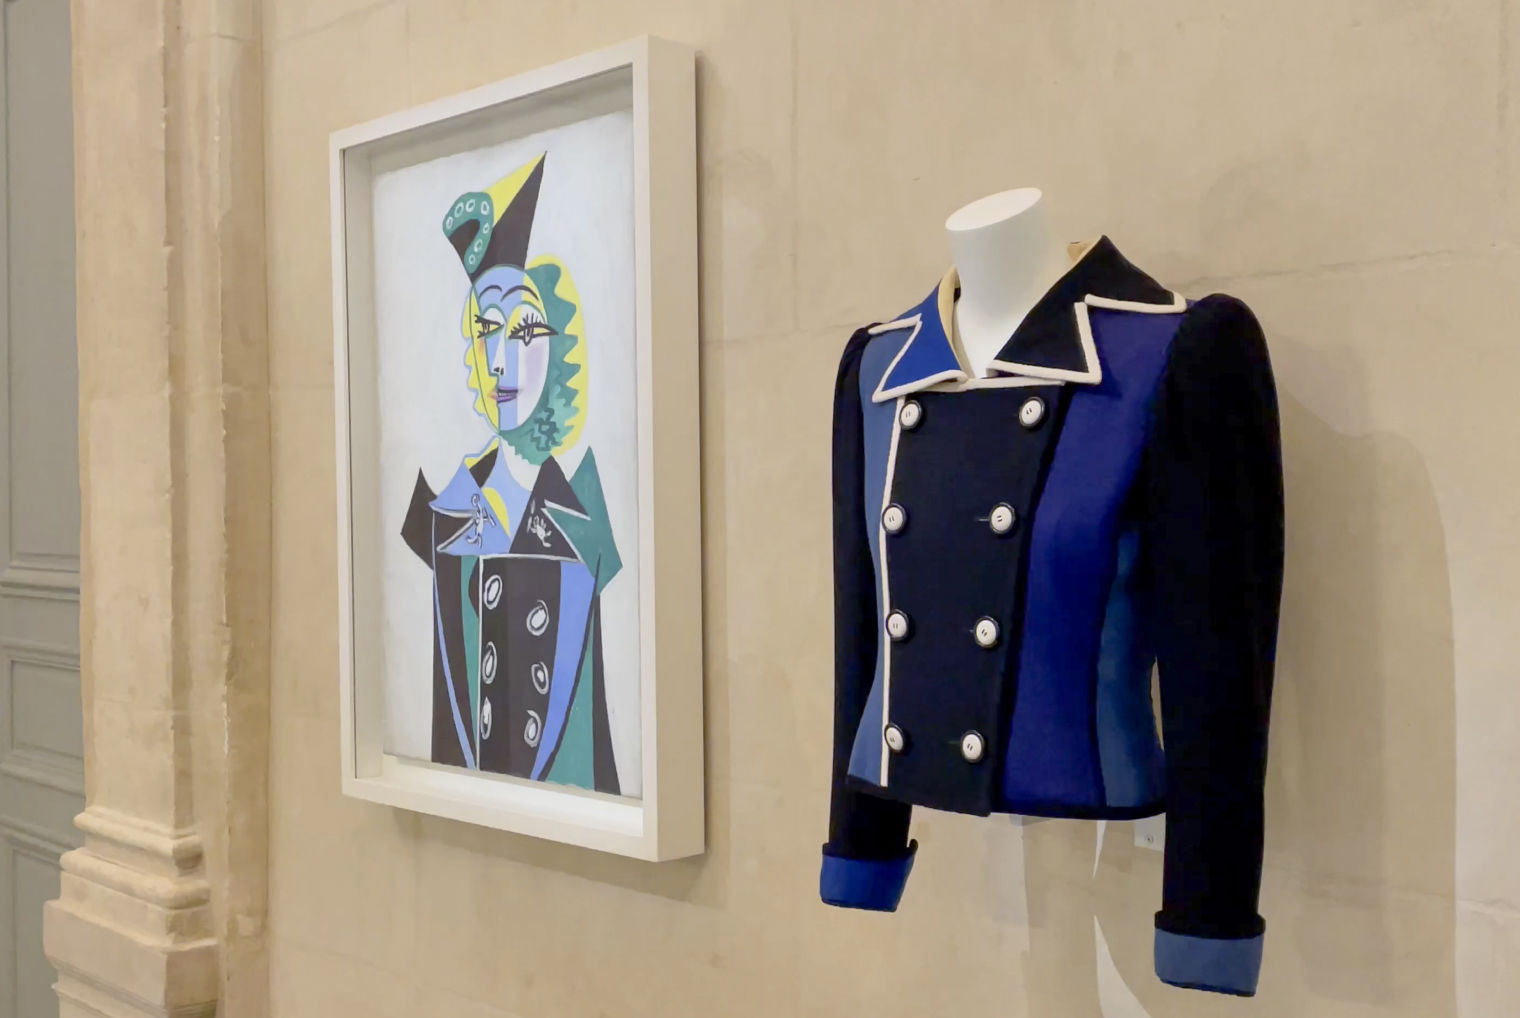 Exhibition photograph showcasing a Picasso-inspired jacket designed by Yves Saint Laurent and a portrait of Nush Eluard by Picasso